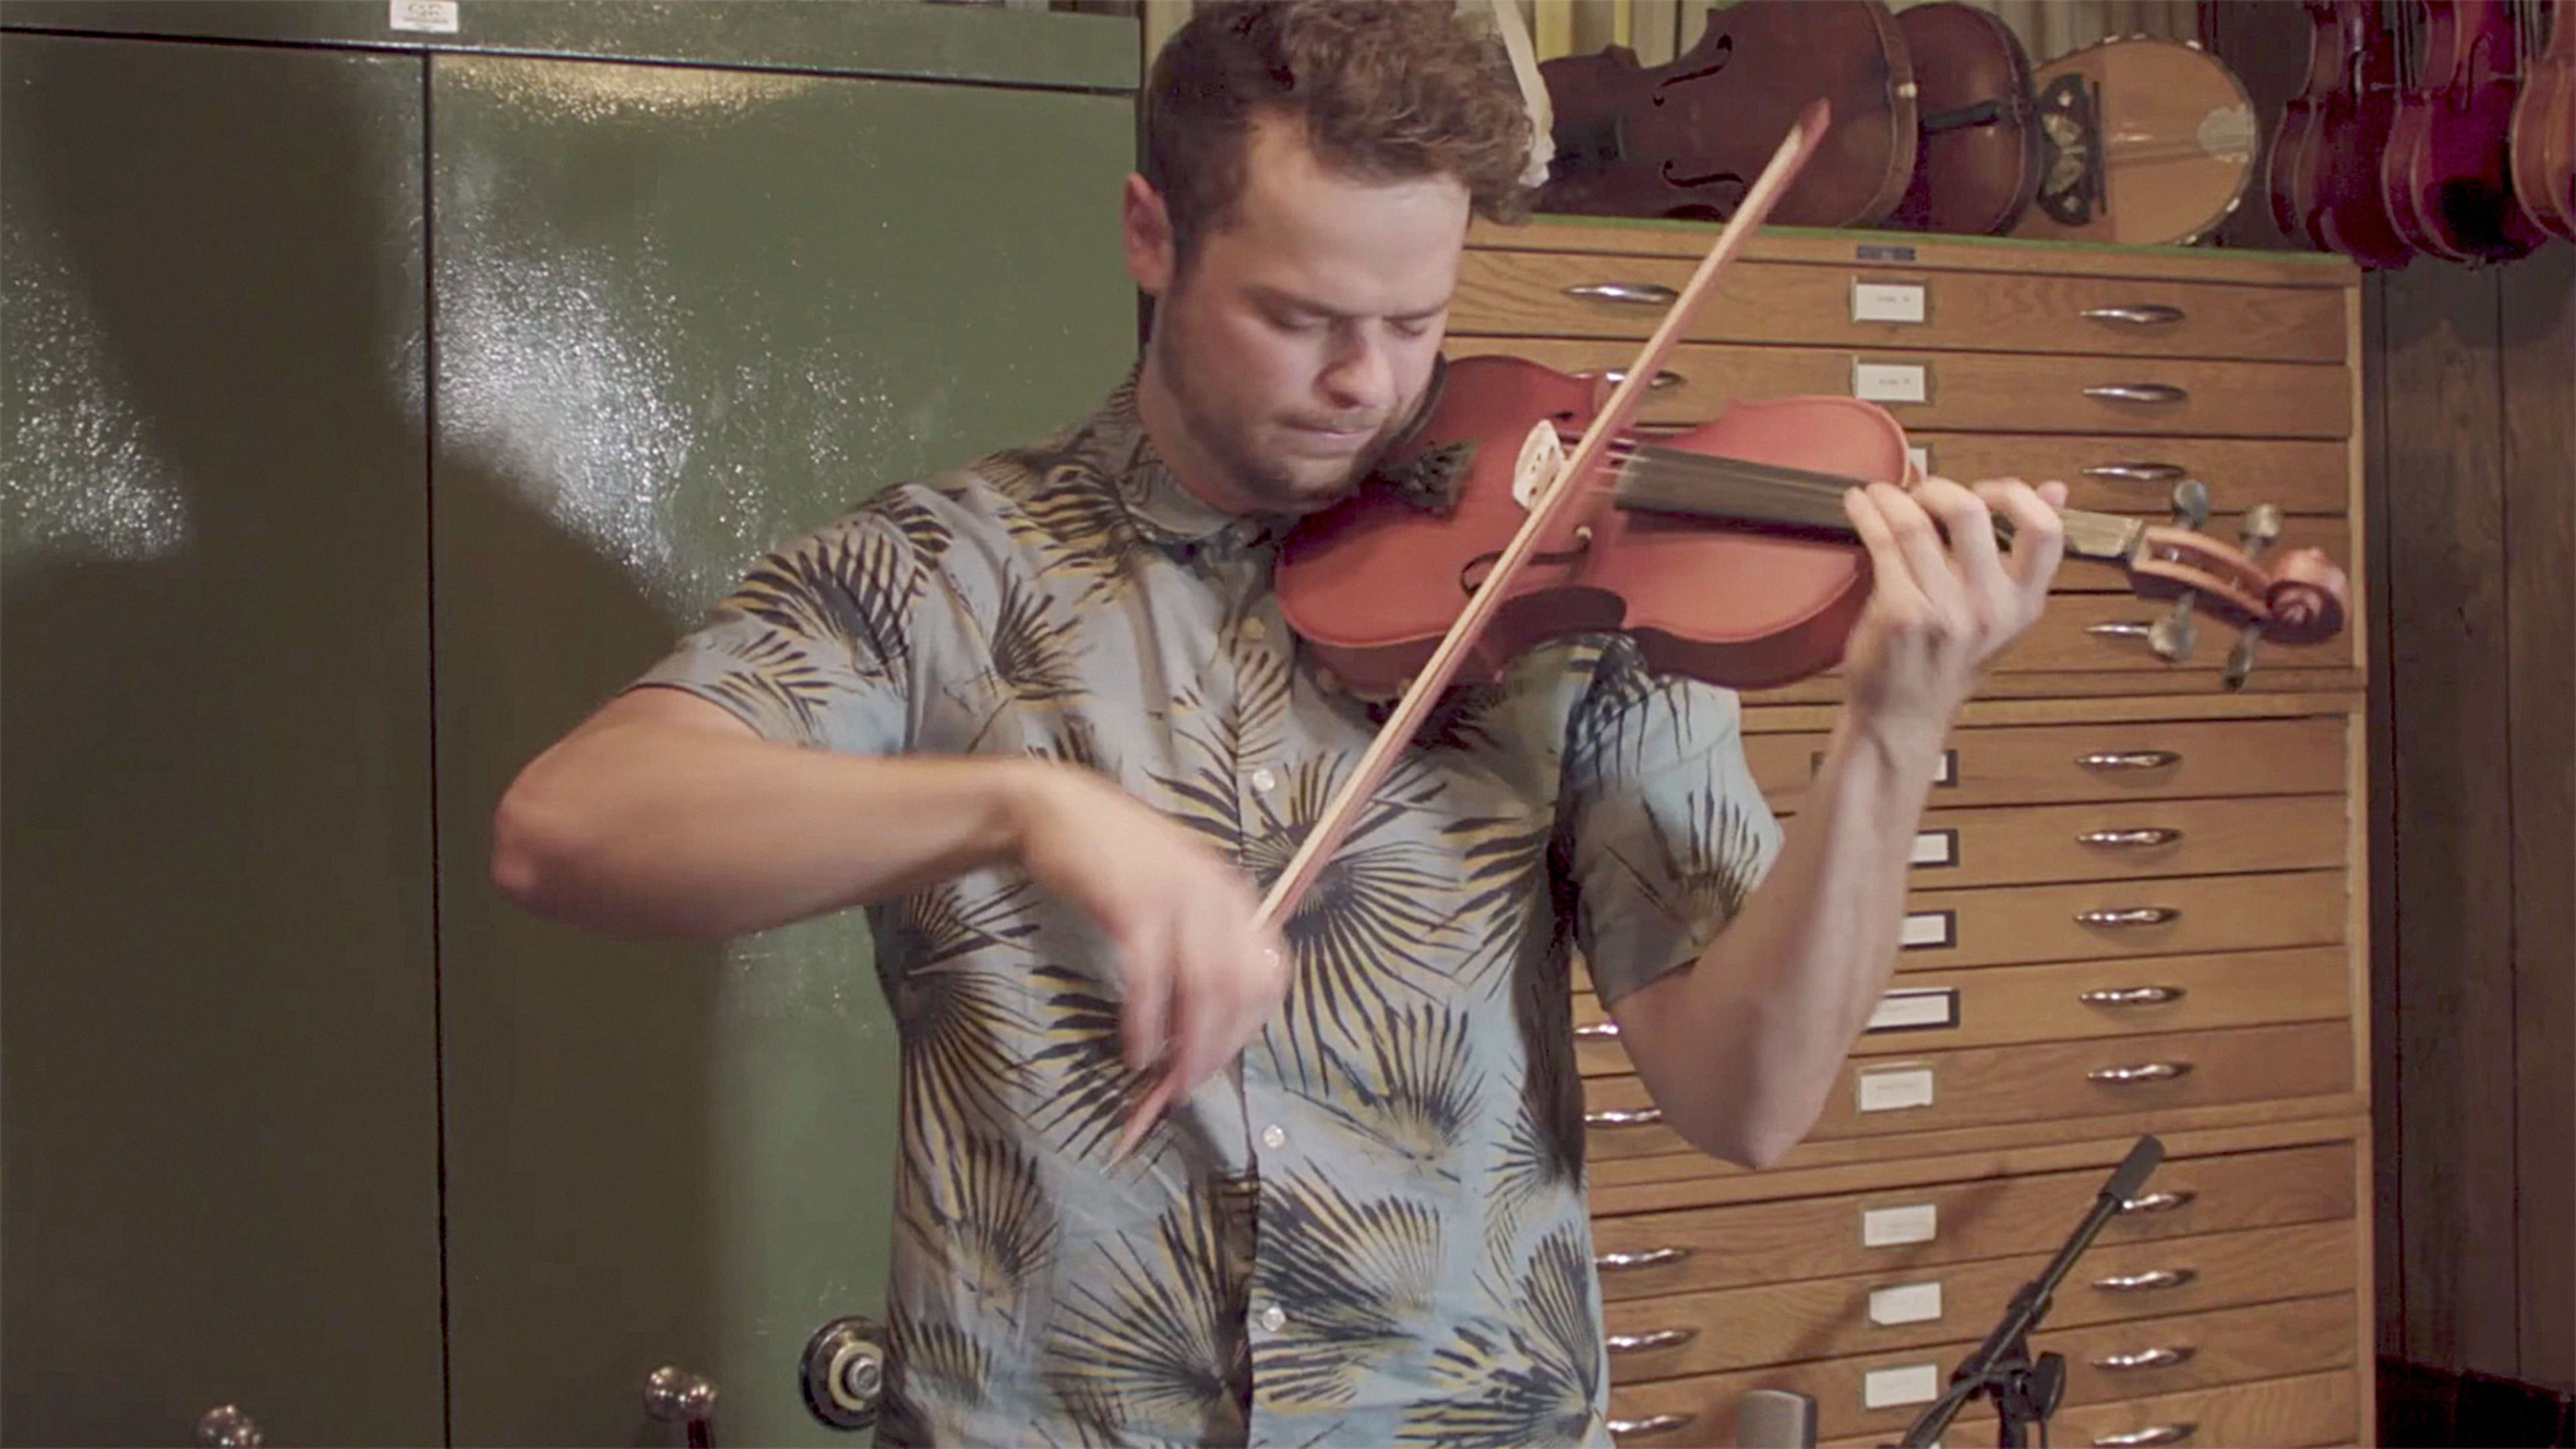 Think You Can Tell A $60 Violin Sound From A $285K One? Think Again.